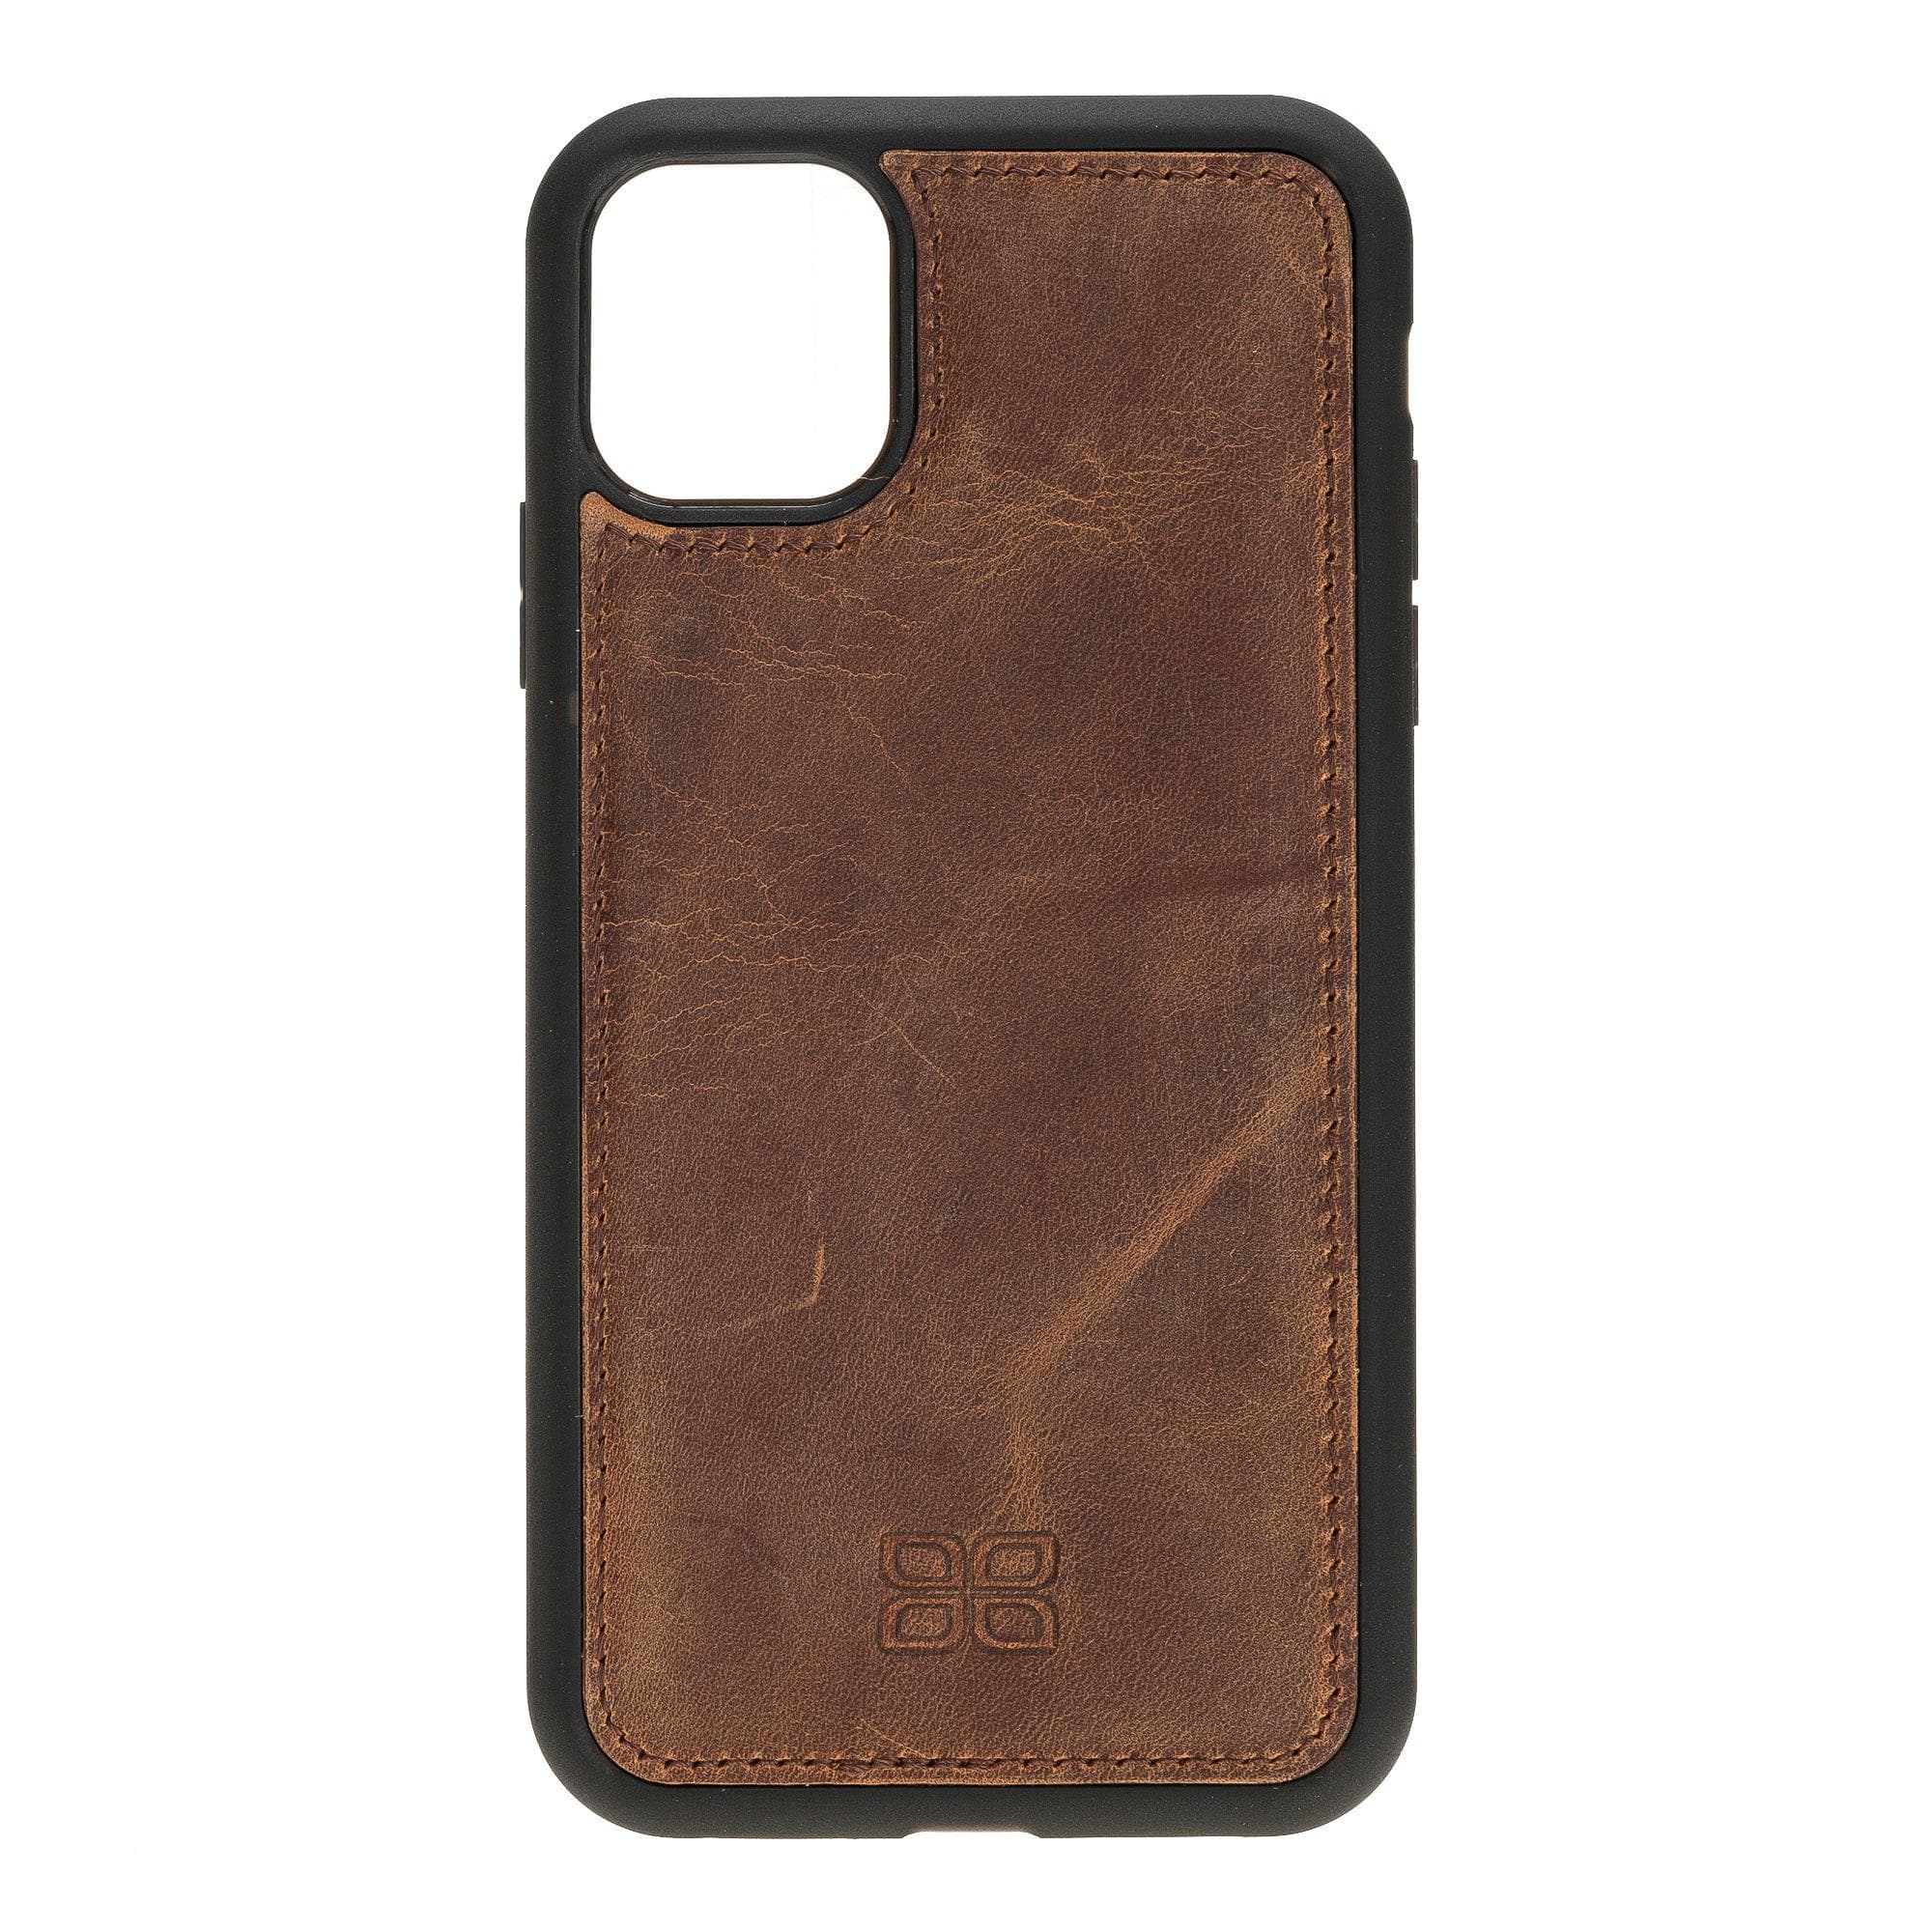 Flex Cover Leather Back Cover Case for Apple iPhone 11 Series iPhone 11 6.1" / Antic Brown Bouletta LTD